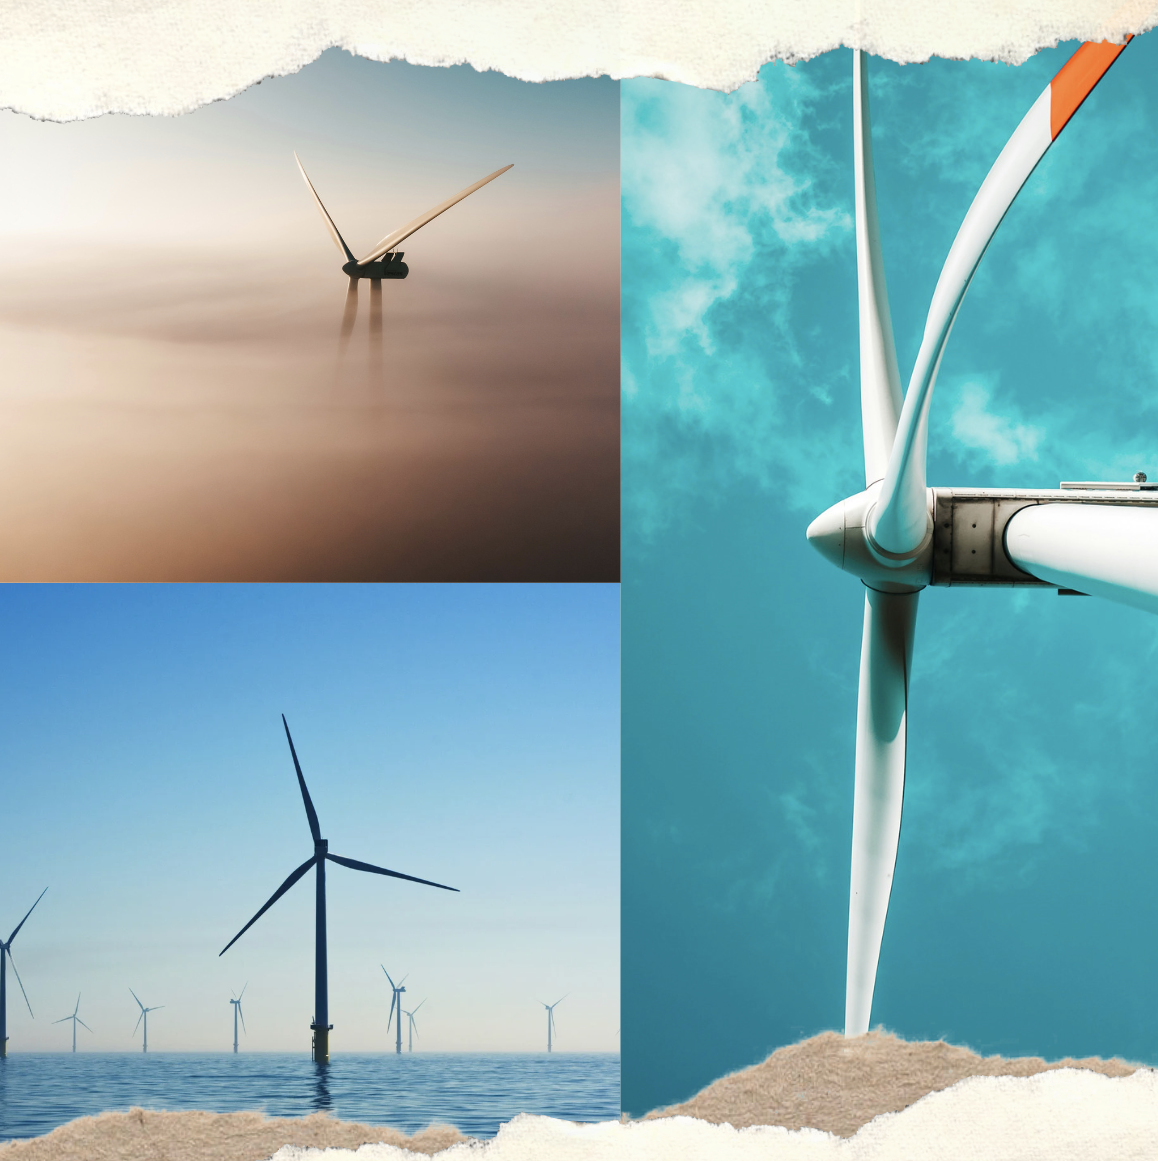 Winds Of Change: The Haliade-X And The Future Of Renewable Energy